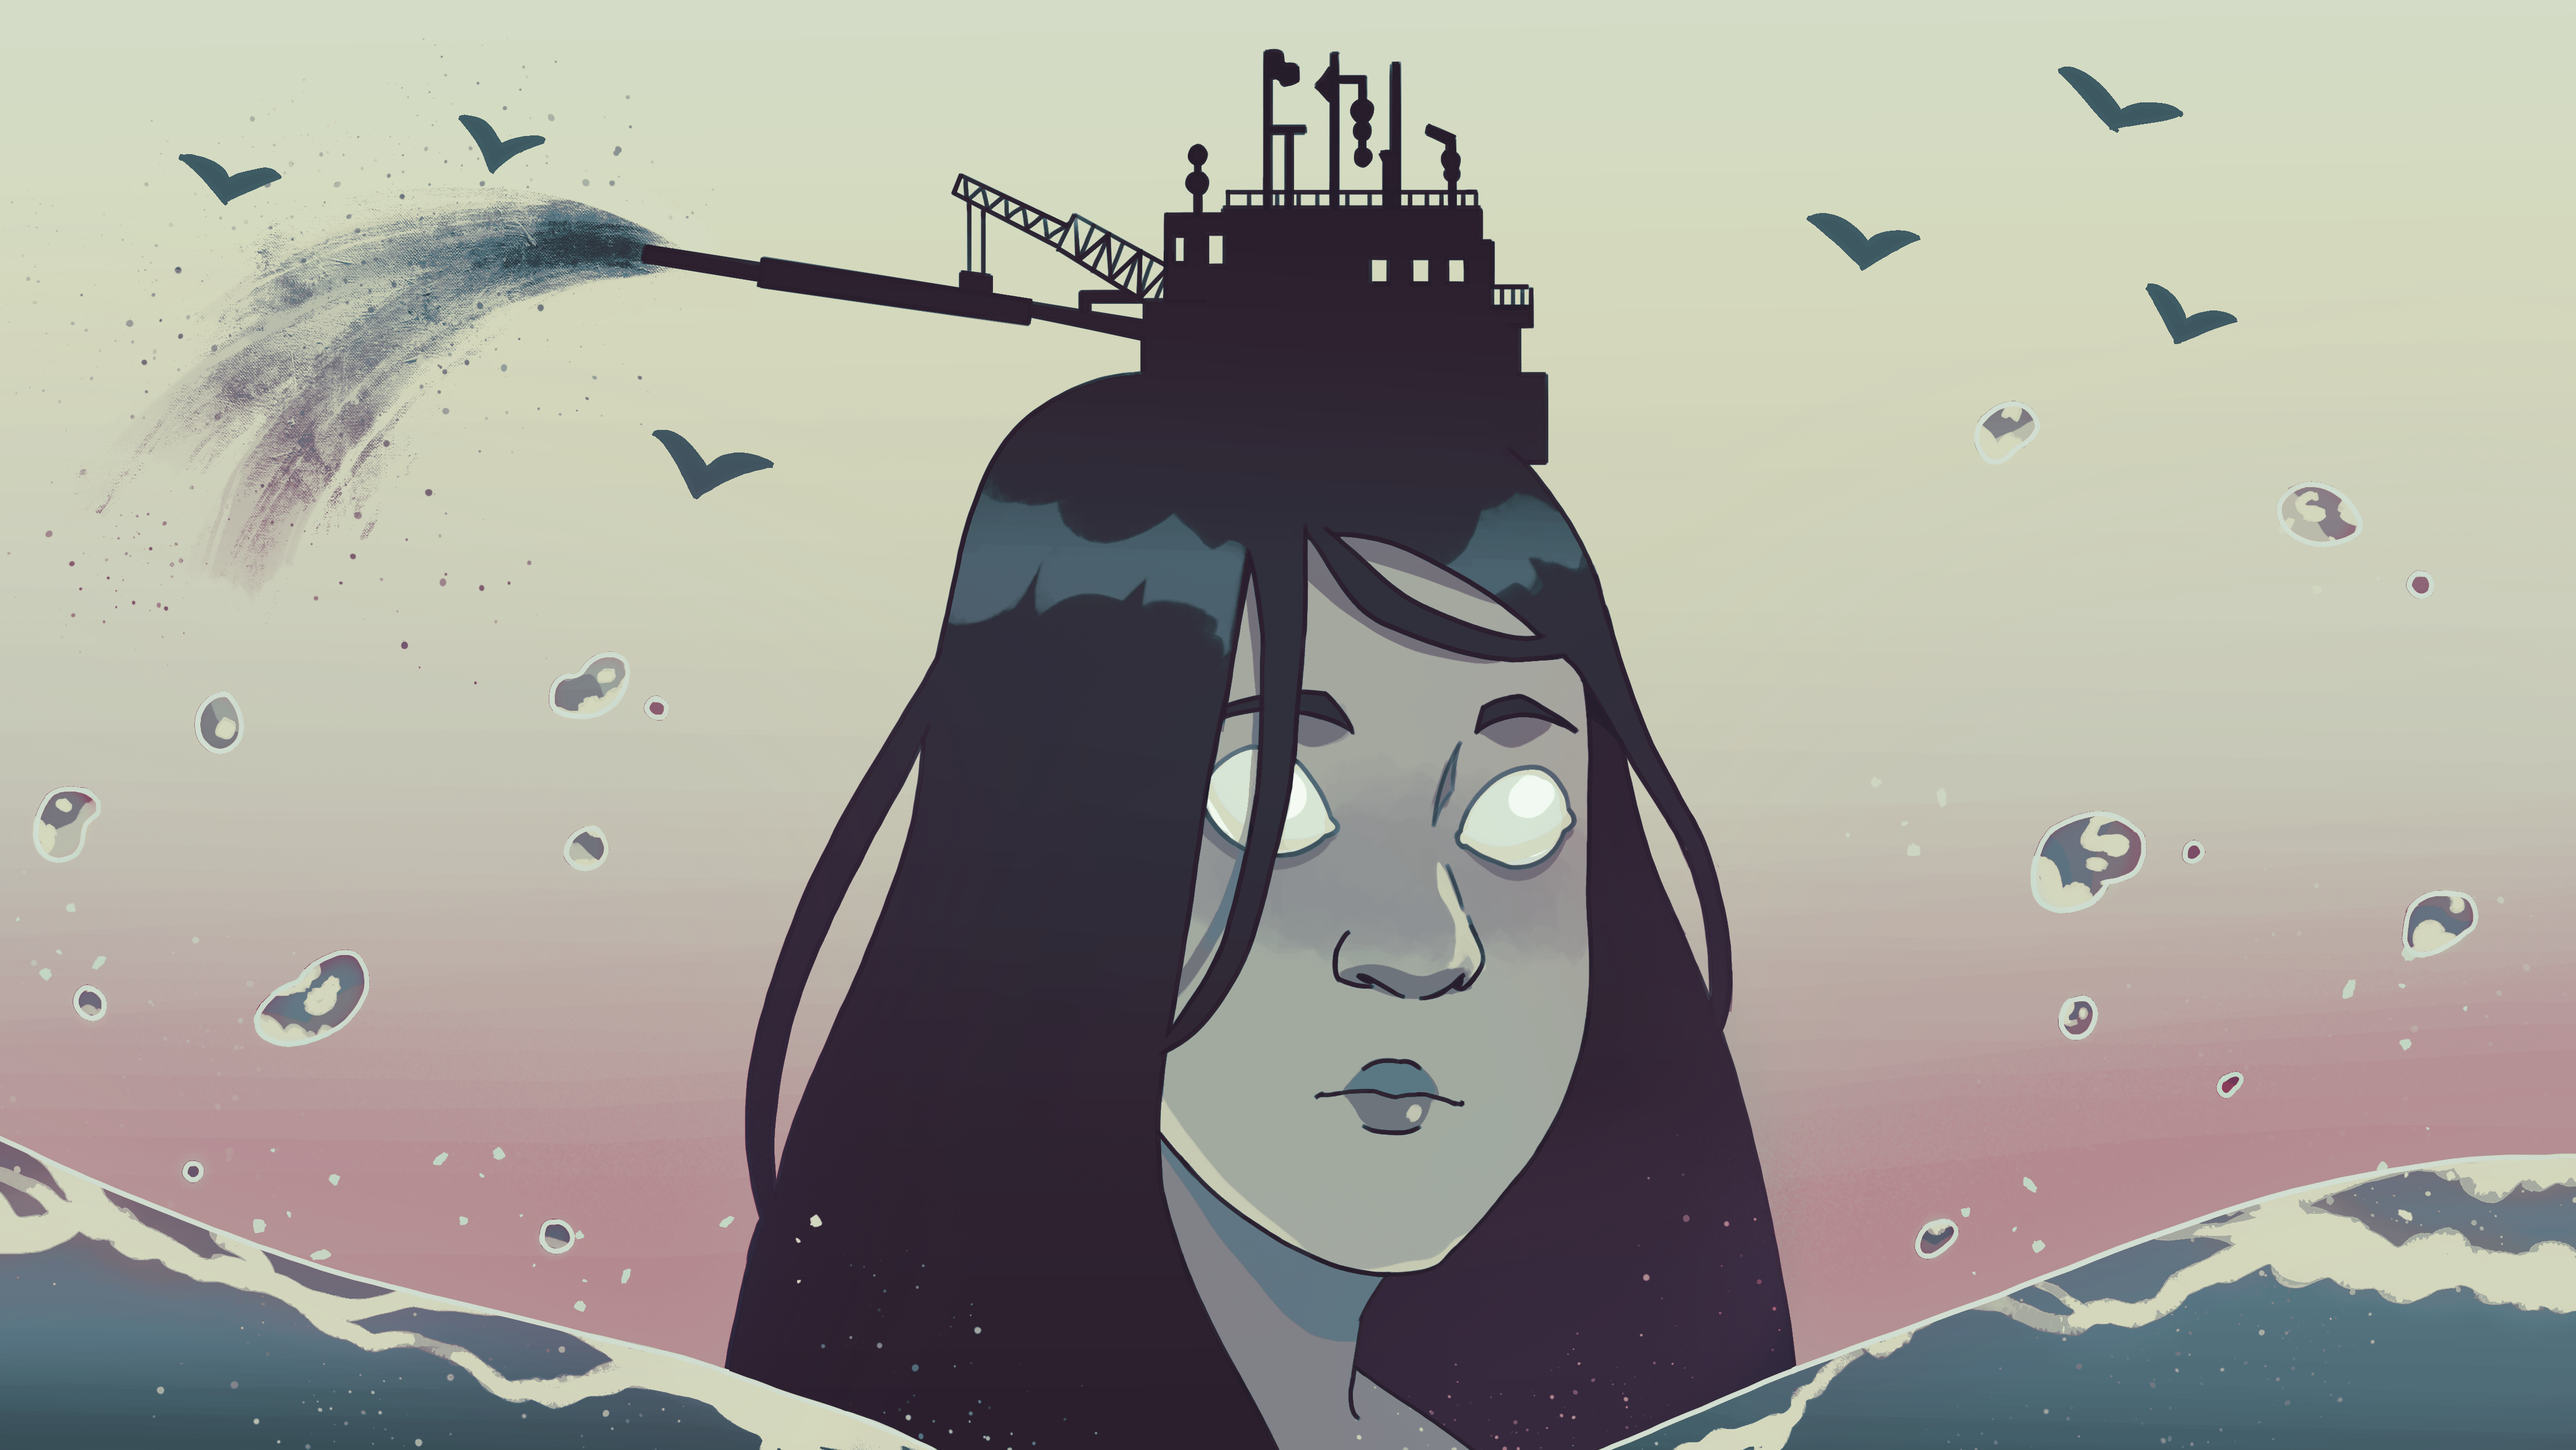 A monstrous feminine figure emerges from the ocean. A large ship sits on top of her head.